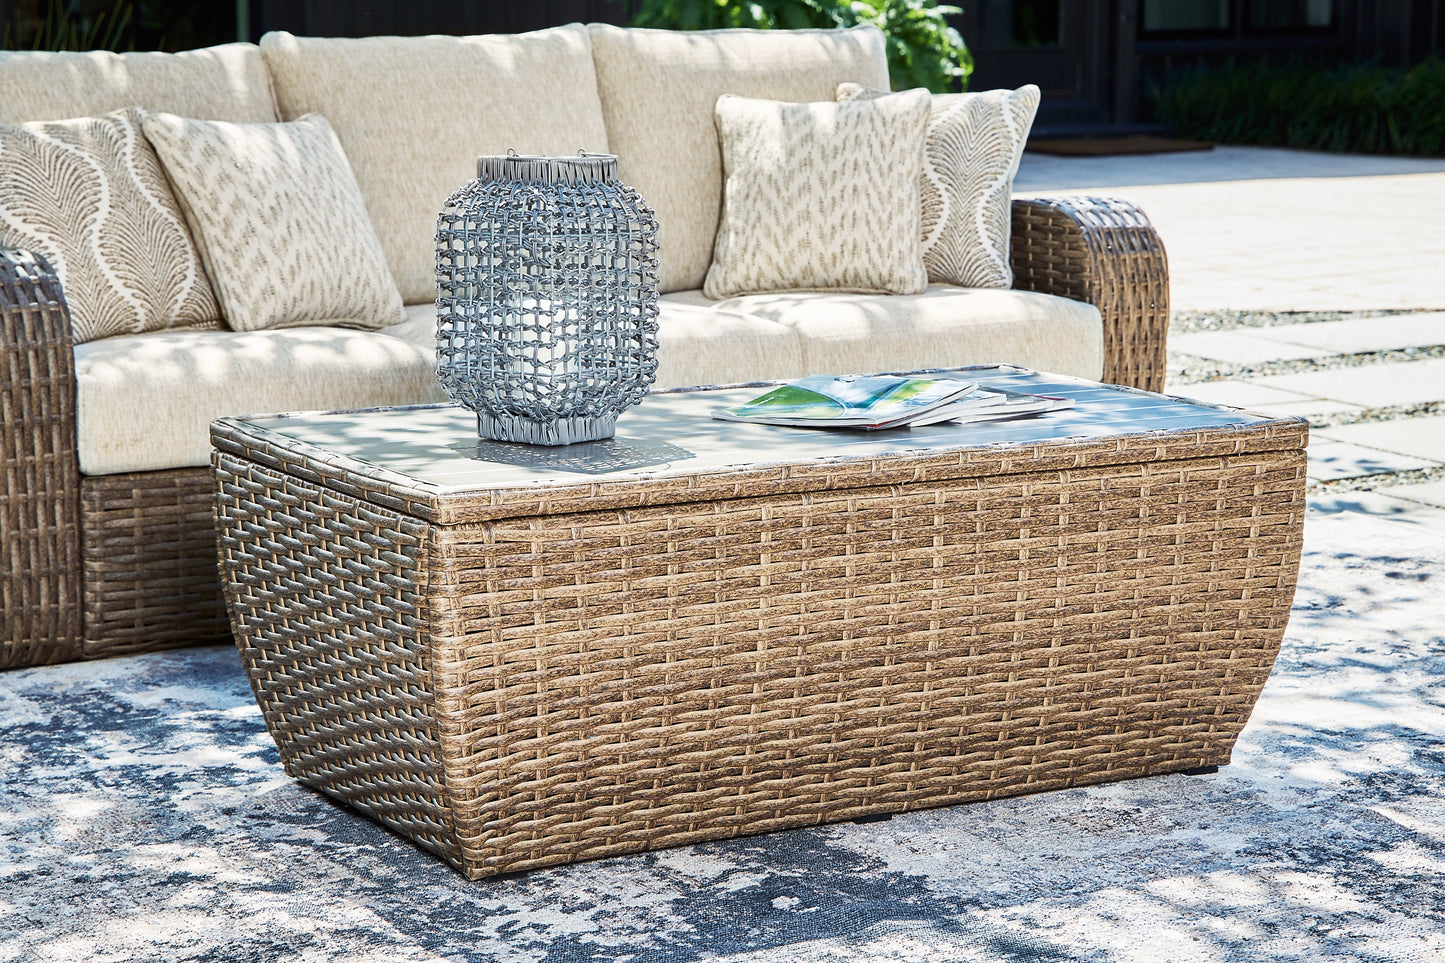 Sandy Bloom Outdoor Coffee Table with End Table Wilson Furniture (OH)  in Bridgeport, Ohio. Serving Bridgeport, Yorkville, Bellaire, & Avondale